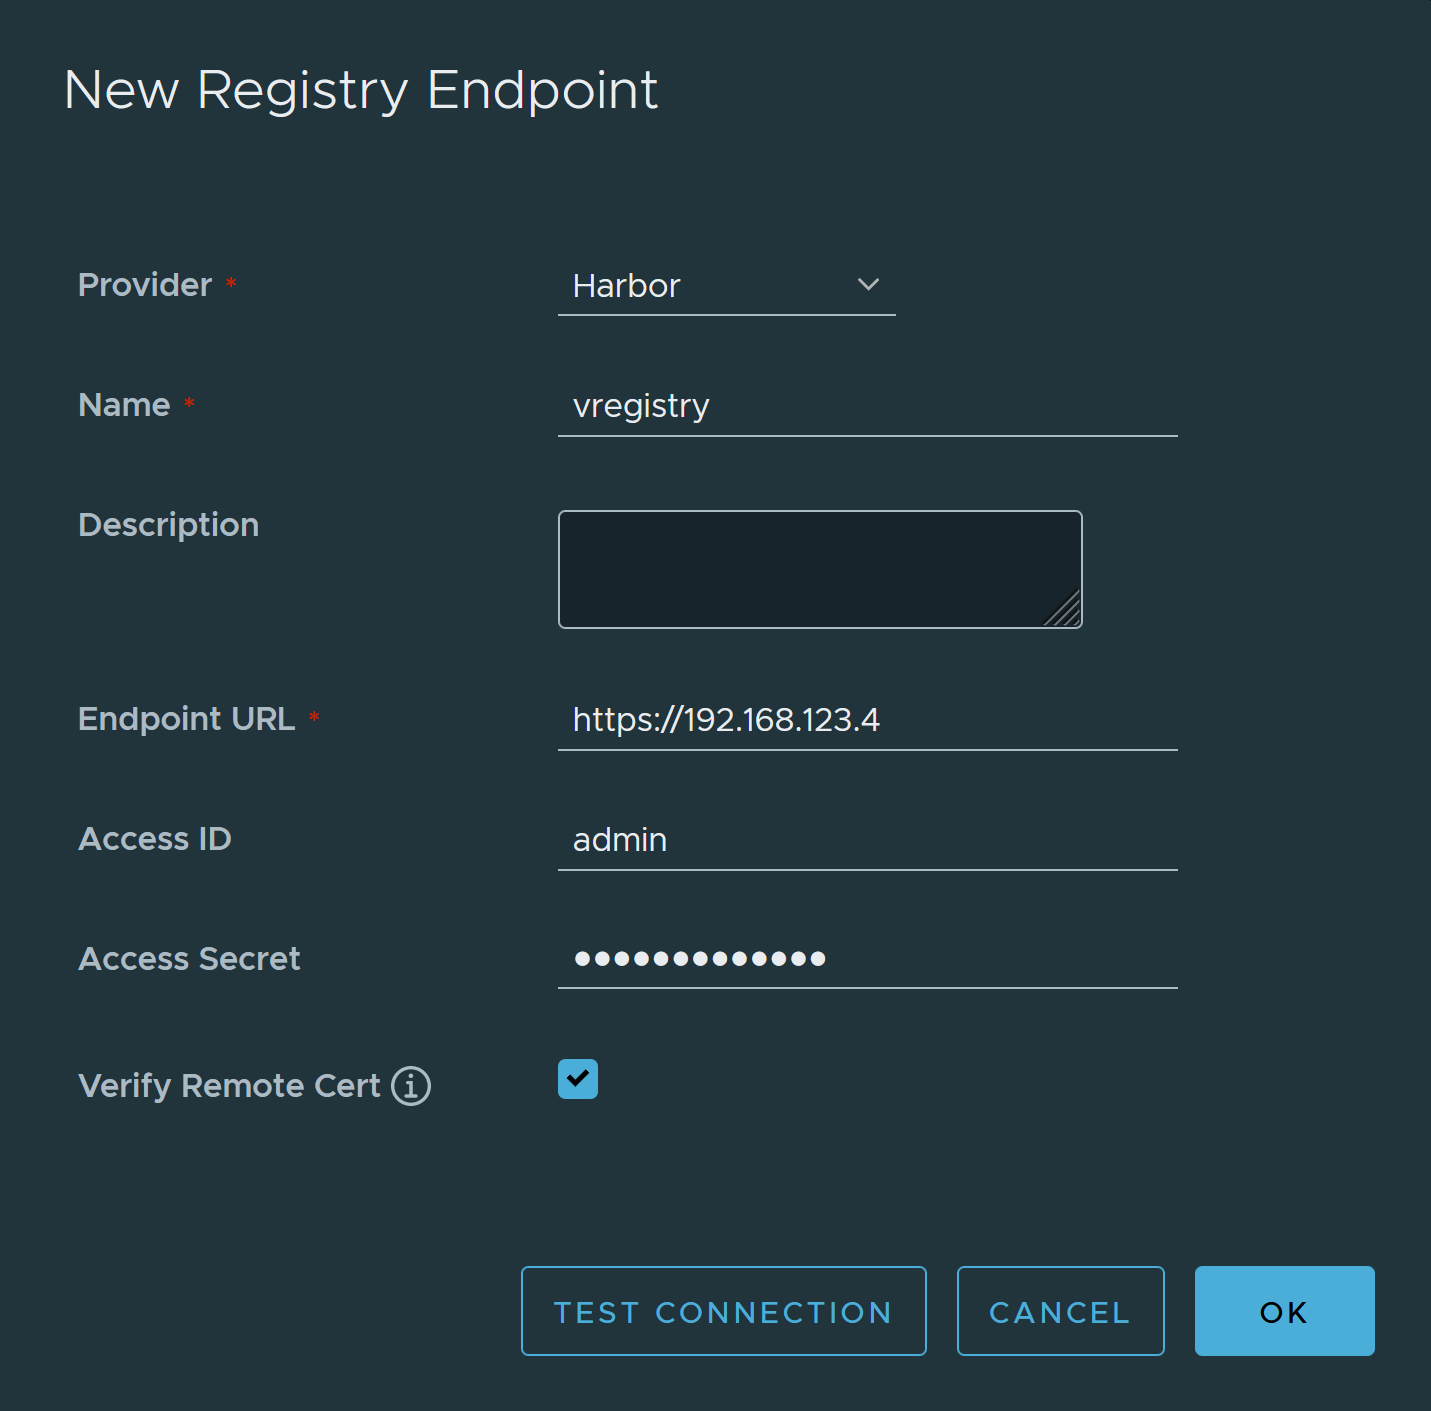 The New Registry Endpoint window populated with the data for the vRegistry URL and credentials